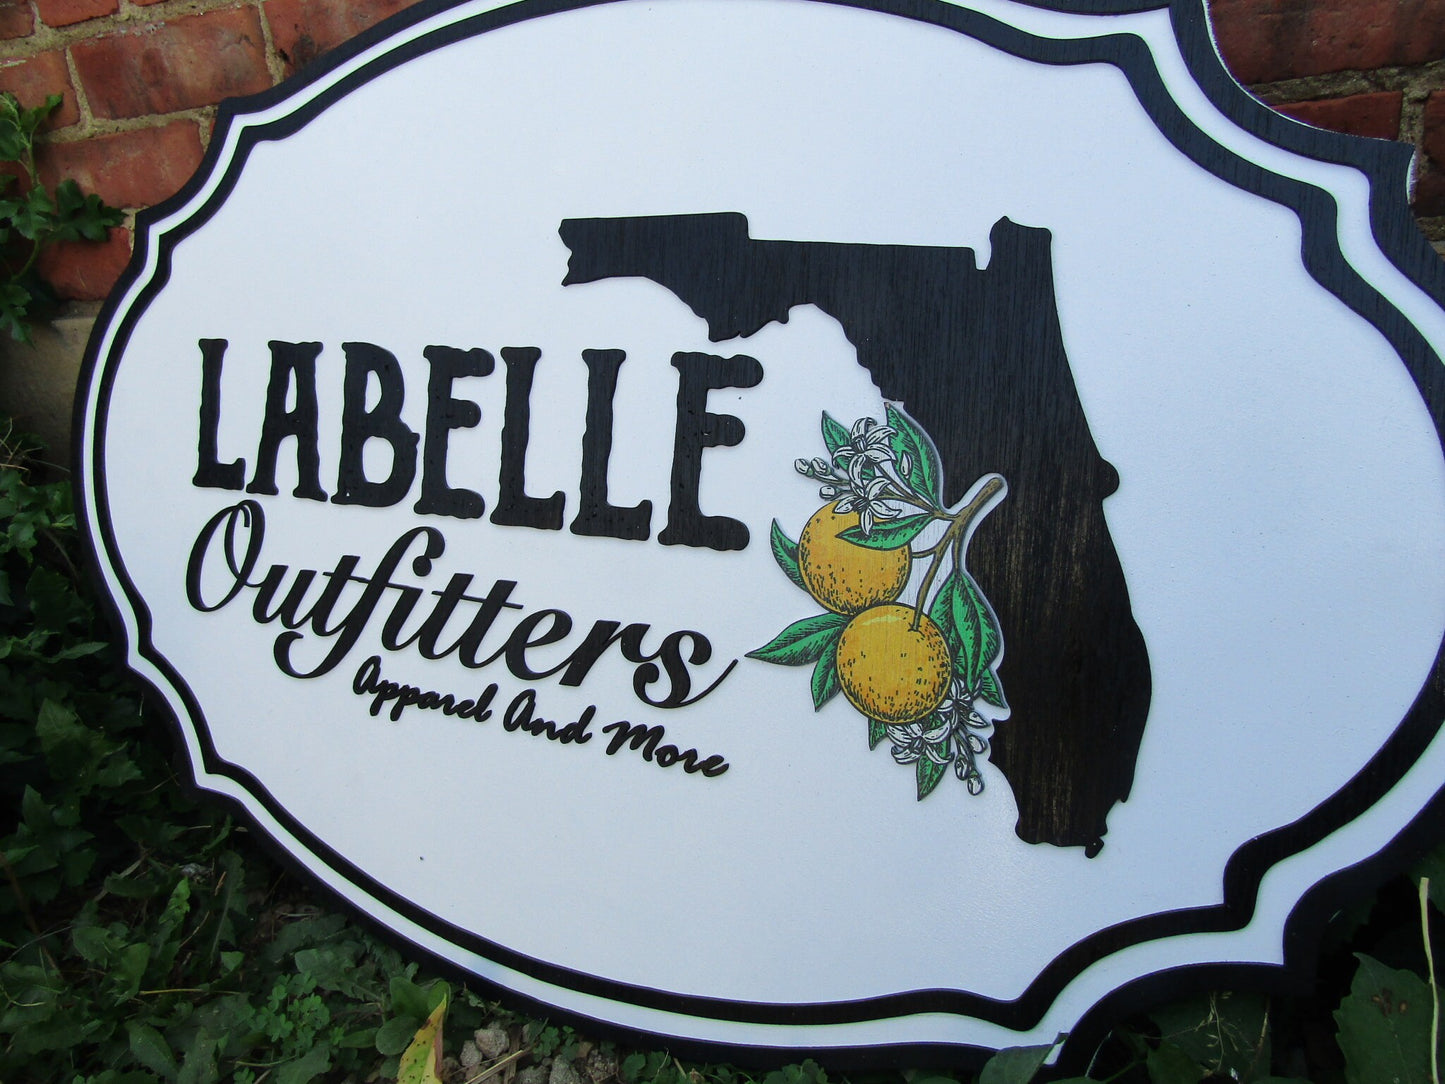 Custom Oval Business Sign Florida Labelle Outfitters Oranges Handmade Wooden Commerical Signage 3d Raised Text Image Your Logo Store Front